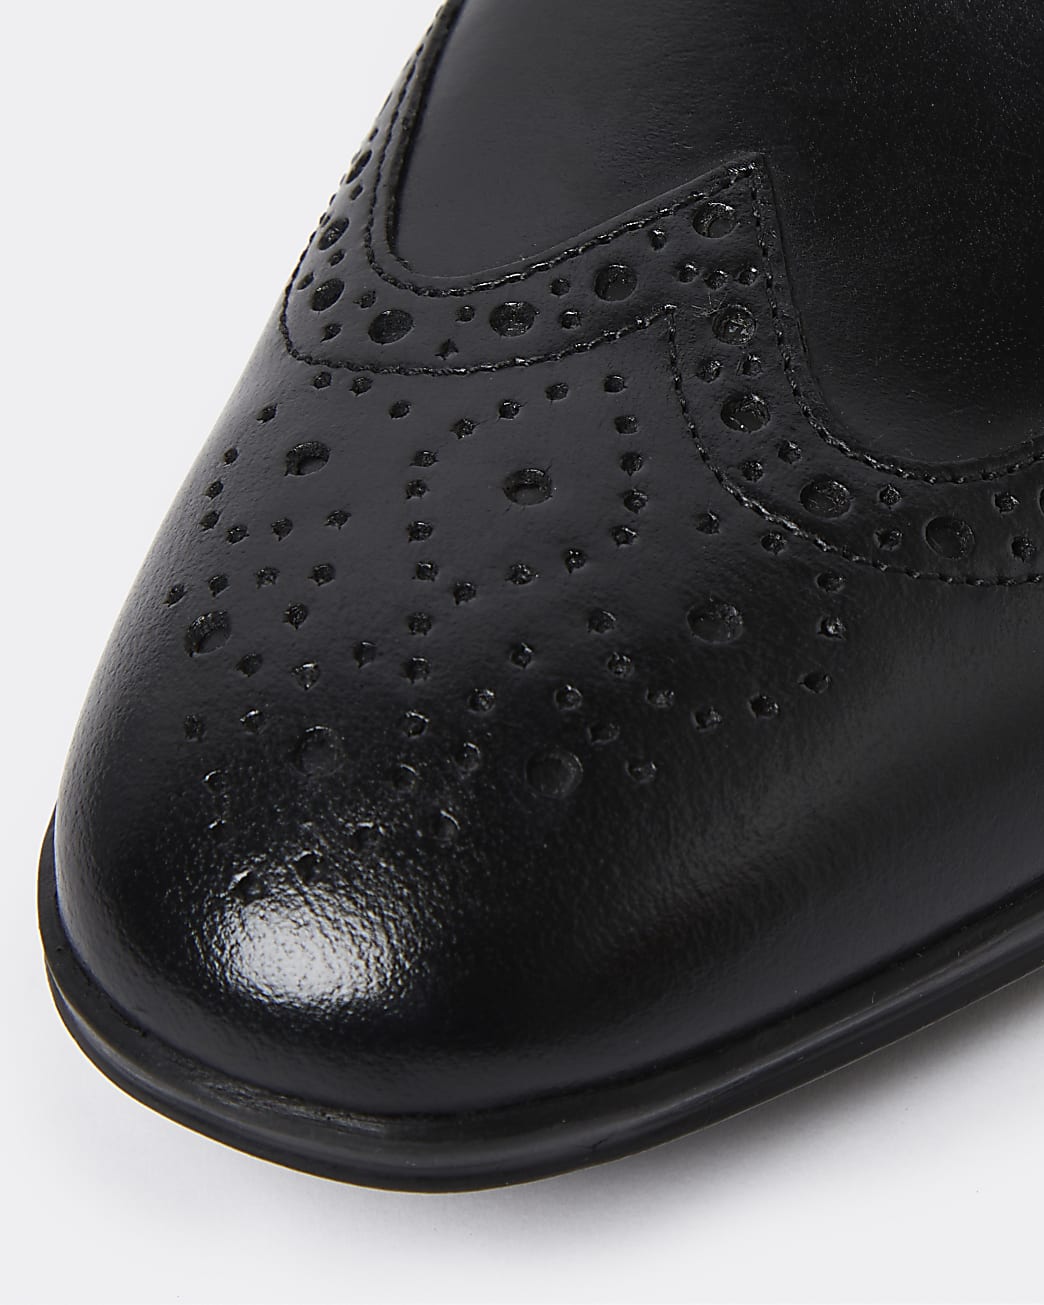 RIVER ISLAND BLACK LEATHER LACE UP BROGUE DERBY SHOES